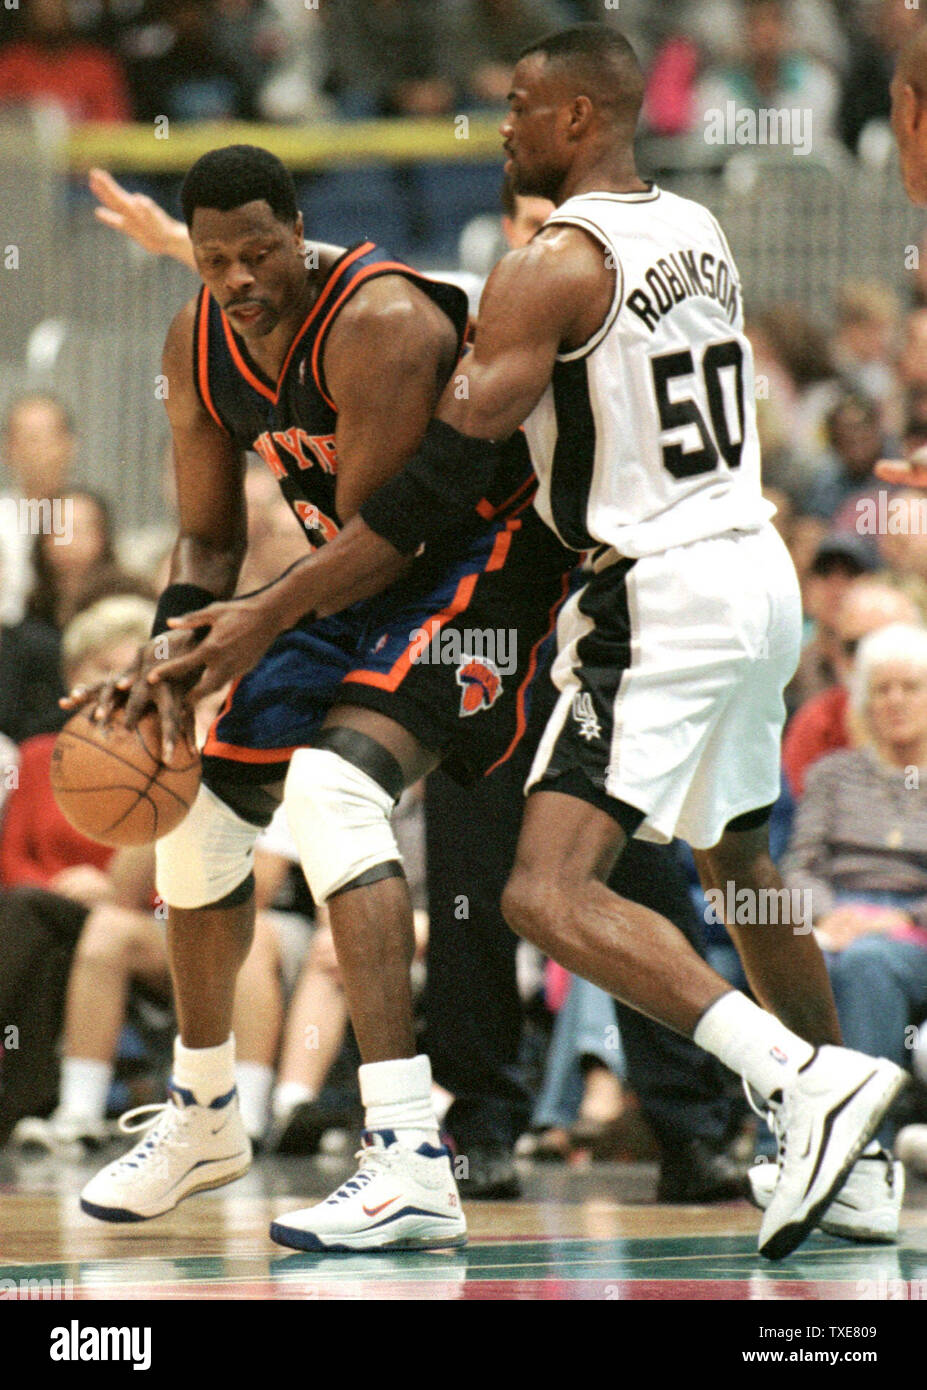 SAP2000012204 - 22 JANUARY 2000 - SAN ANTONIO, TEXAS, USA:  Patrick Ewing (33) of the New York Knicks tries to get past San Antonio Spurs David Robinson (50) during second quarter action at the Alamodome. The Spurs defeated the Knicks 96-83, Jaunary 22, in a rematch of last year's NBA finals.   rg/jm/Joe Mitchell UPI Stock Photo